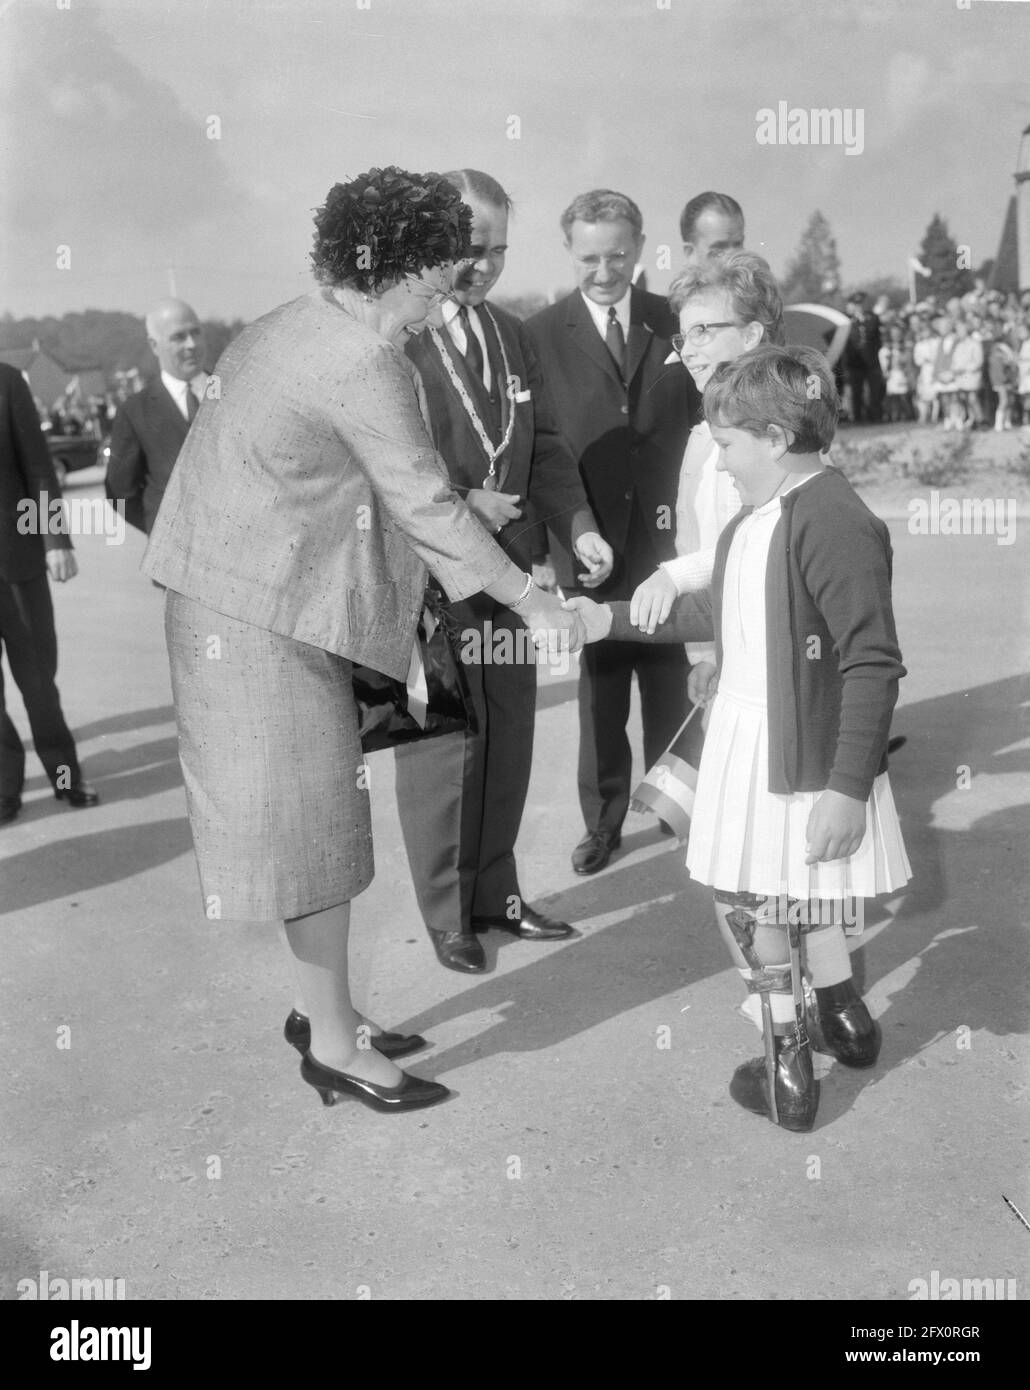 Queen Juliana meets with a disabled person from the Valkenburg rehabilitation center, September 14, 1966, visits, disabled, queens, The Netherlands, 20th century press agency photo, news to remember, documentary, historic photography 1945-1990, visual stories, human history of the Twentieth Century, capturing moments in time Stock Photo